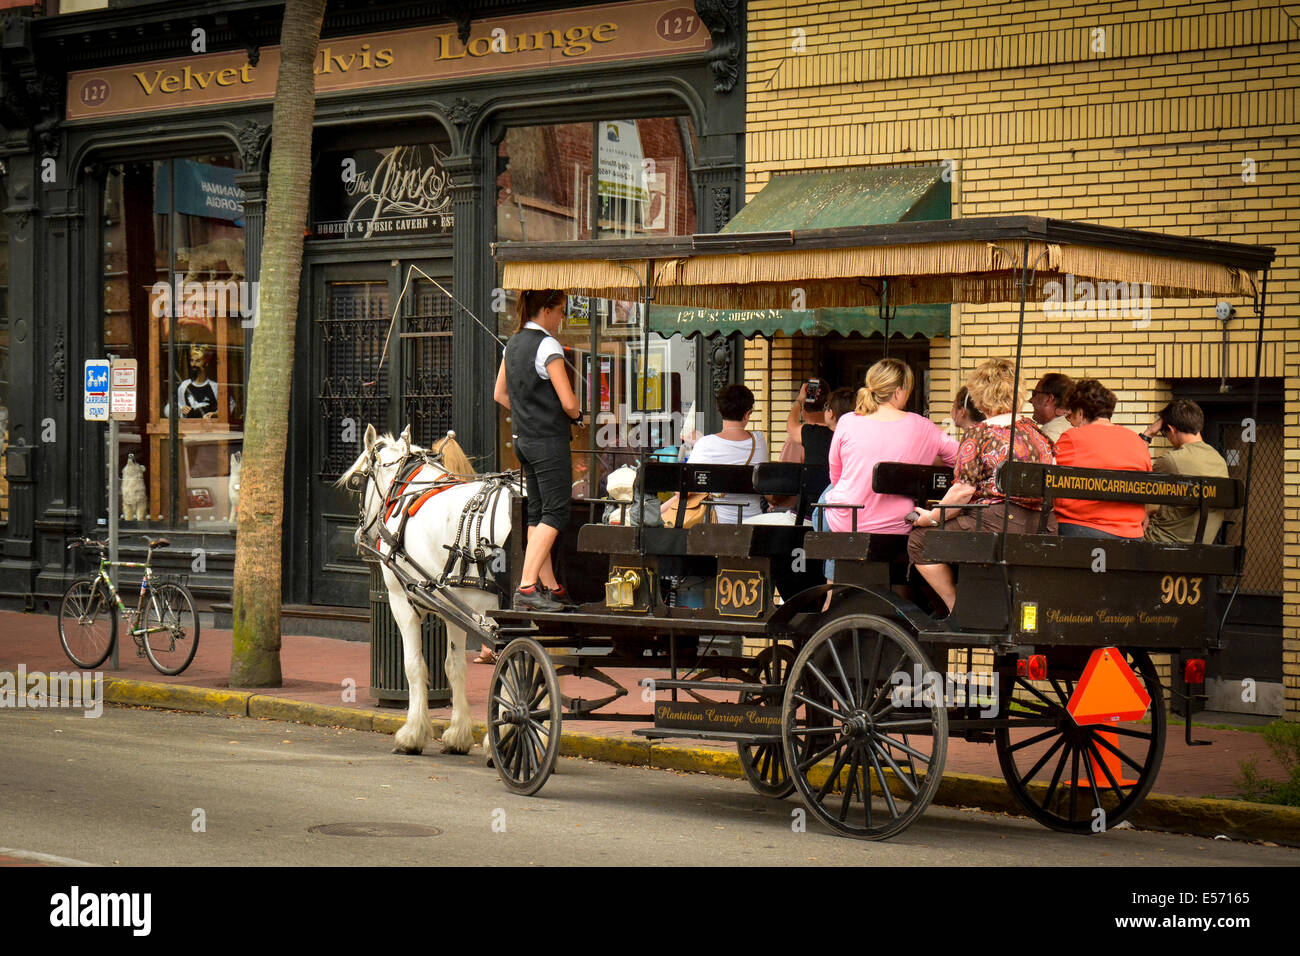 Tourist enjoy a stop at the Velvet Elvis Lounge while aboard their horse drawn carriage in Savannah, GA, USA Stock Photo